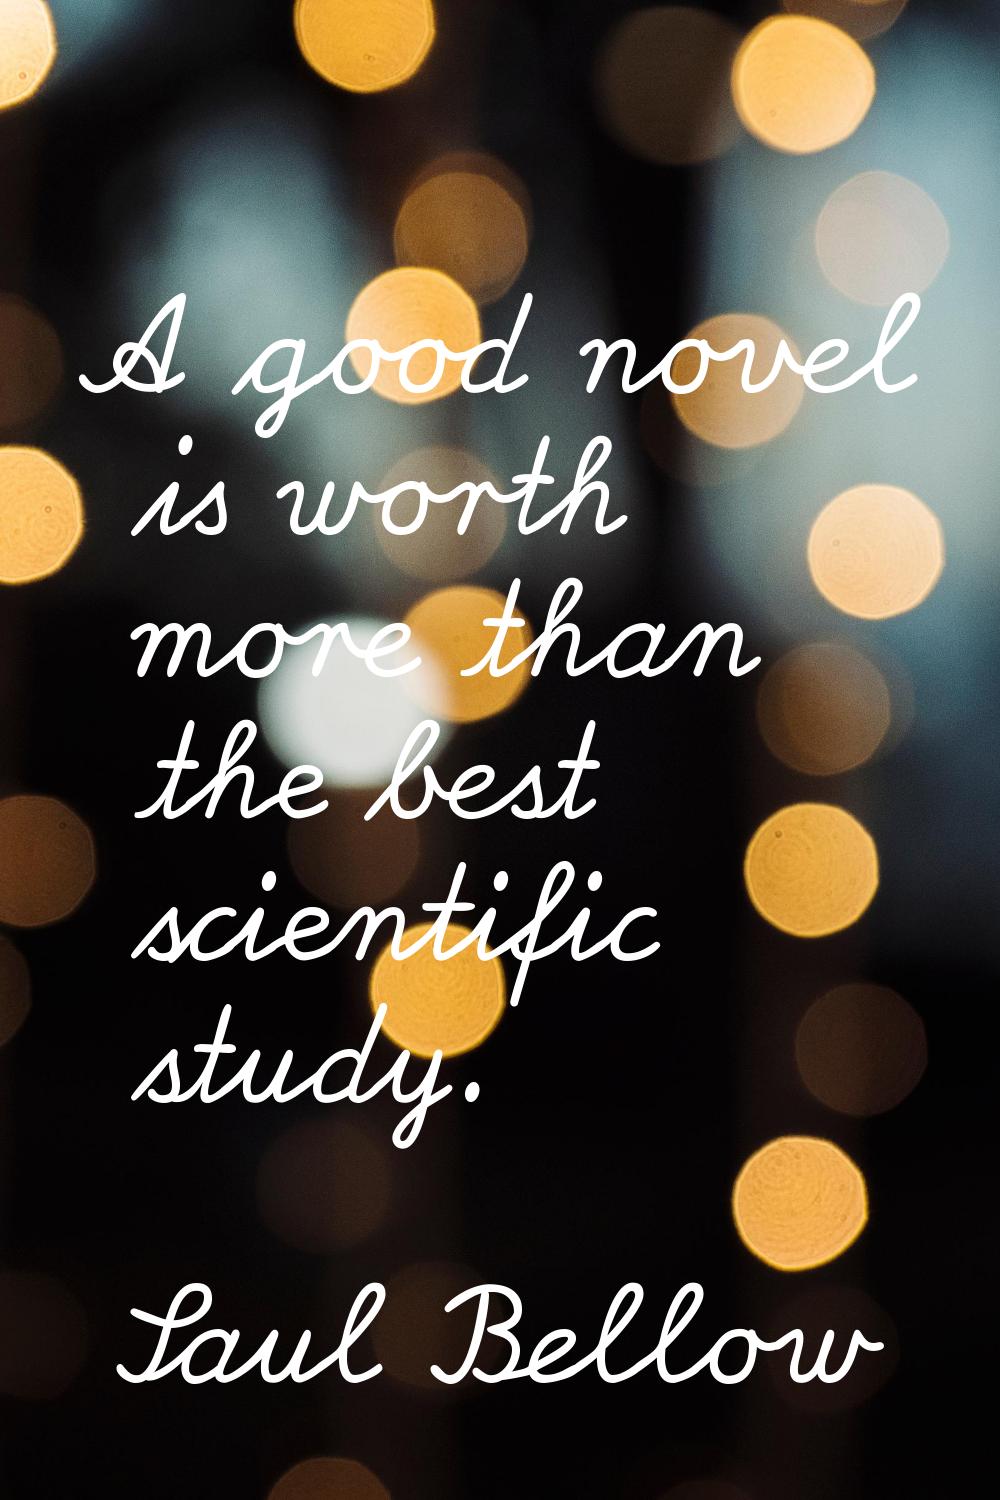 A good novel is worth more than the best scientific study.